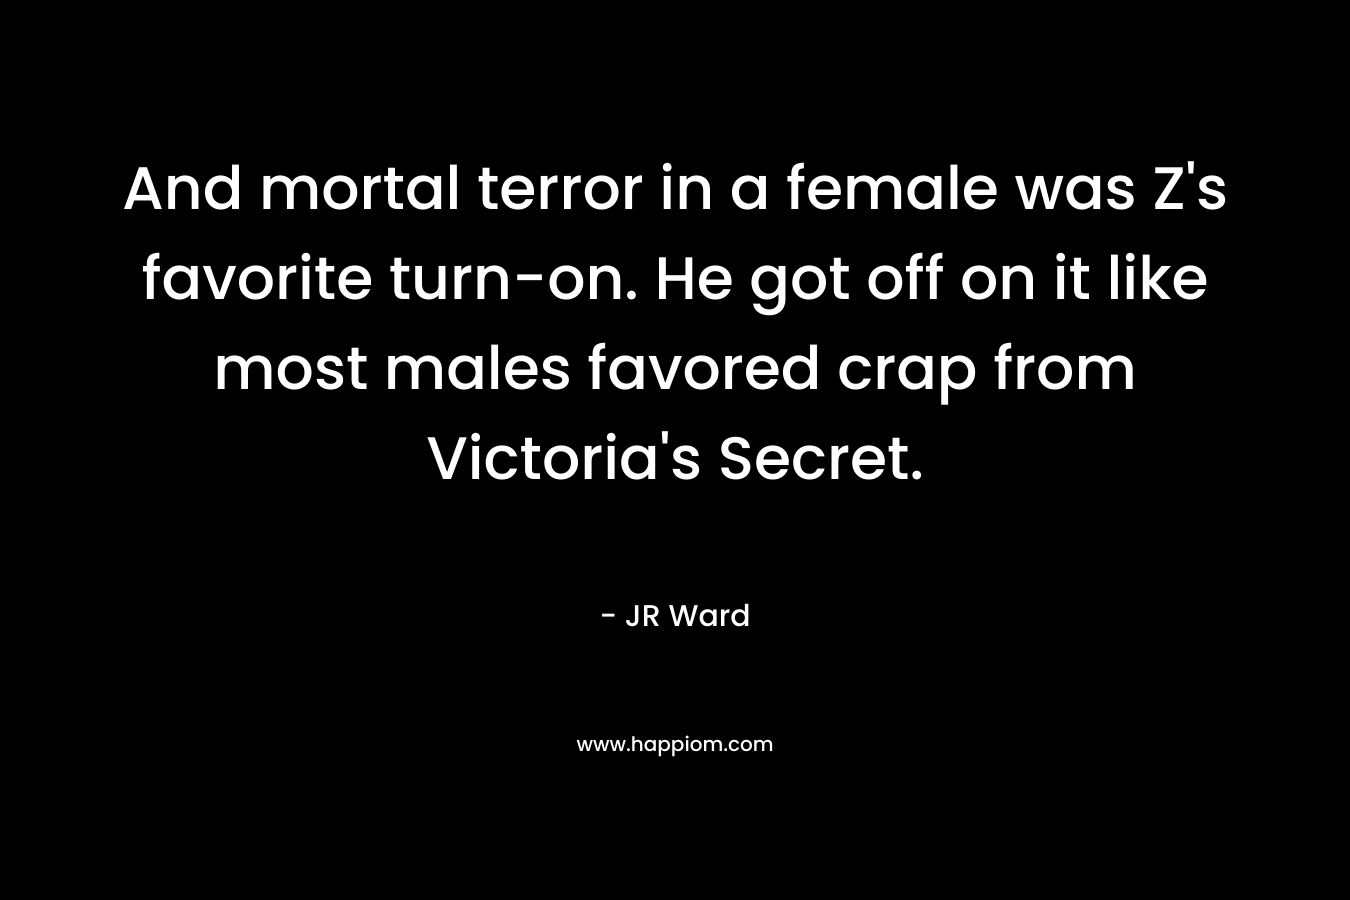 And mortal terror in a female was Z's favorite turn-on. He got off on it like most males favored crap from Victoria's Secret.